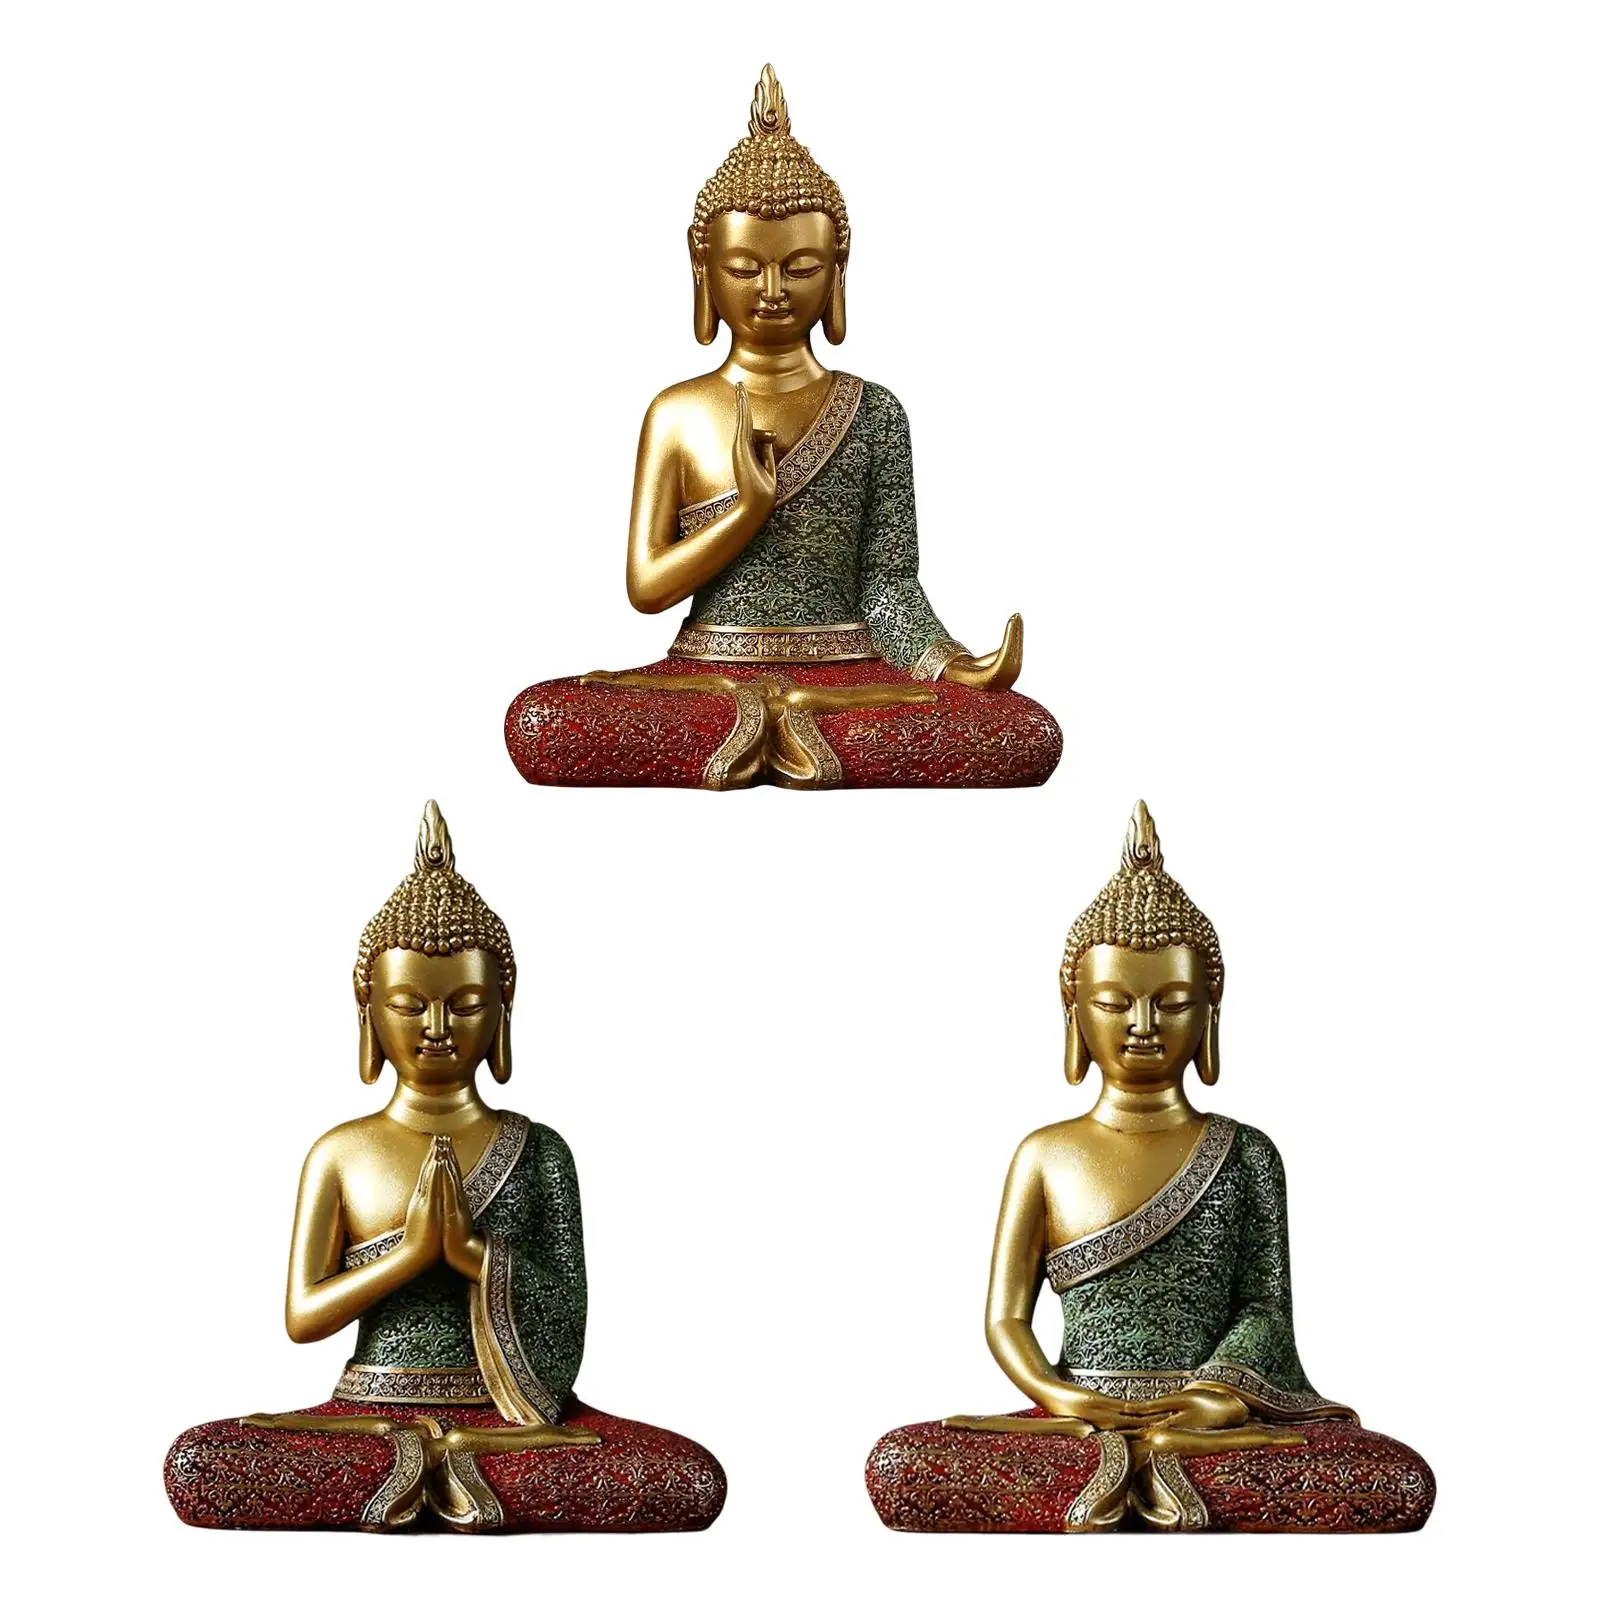 Buddha Statue Religious Sculpture Fengshui Decor for Home Office Decor Gift